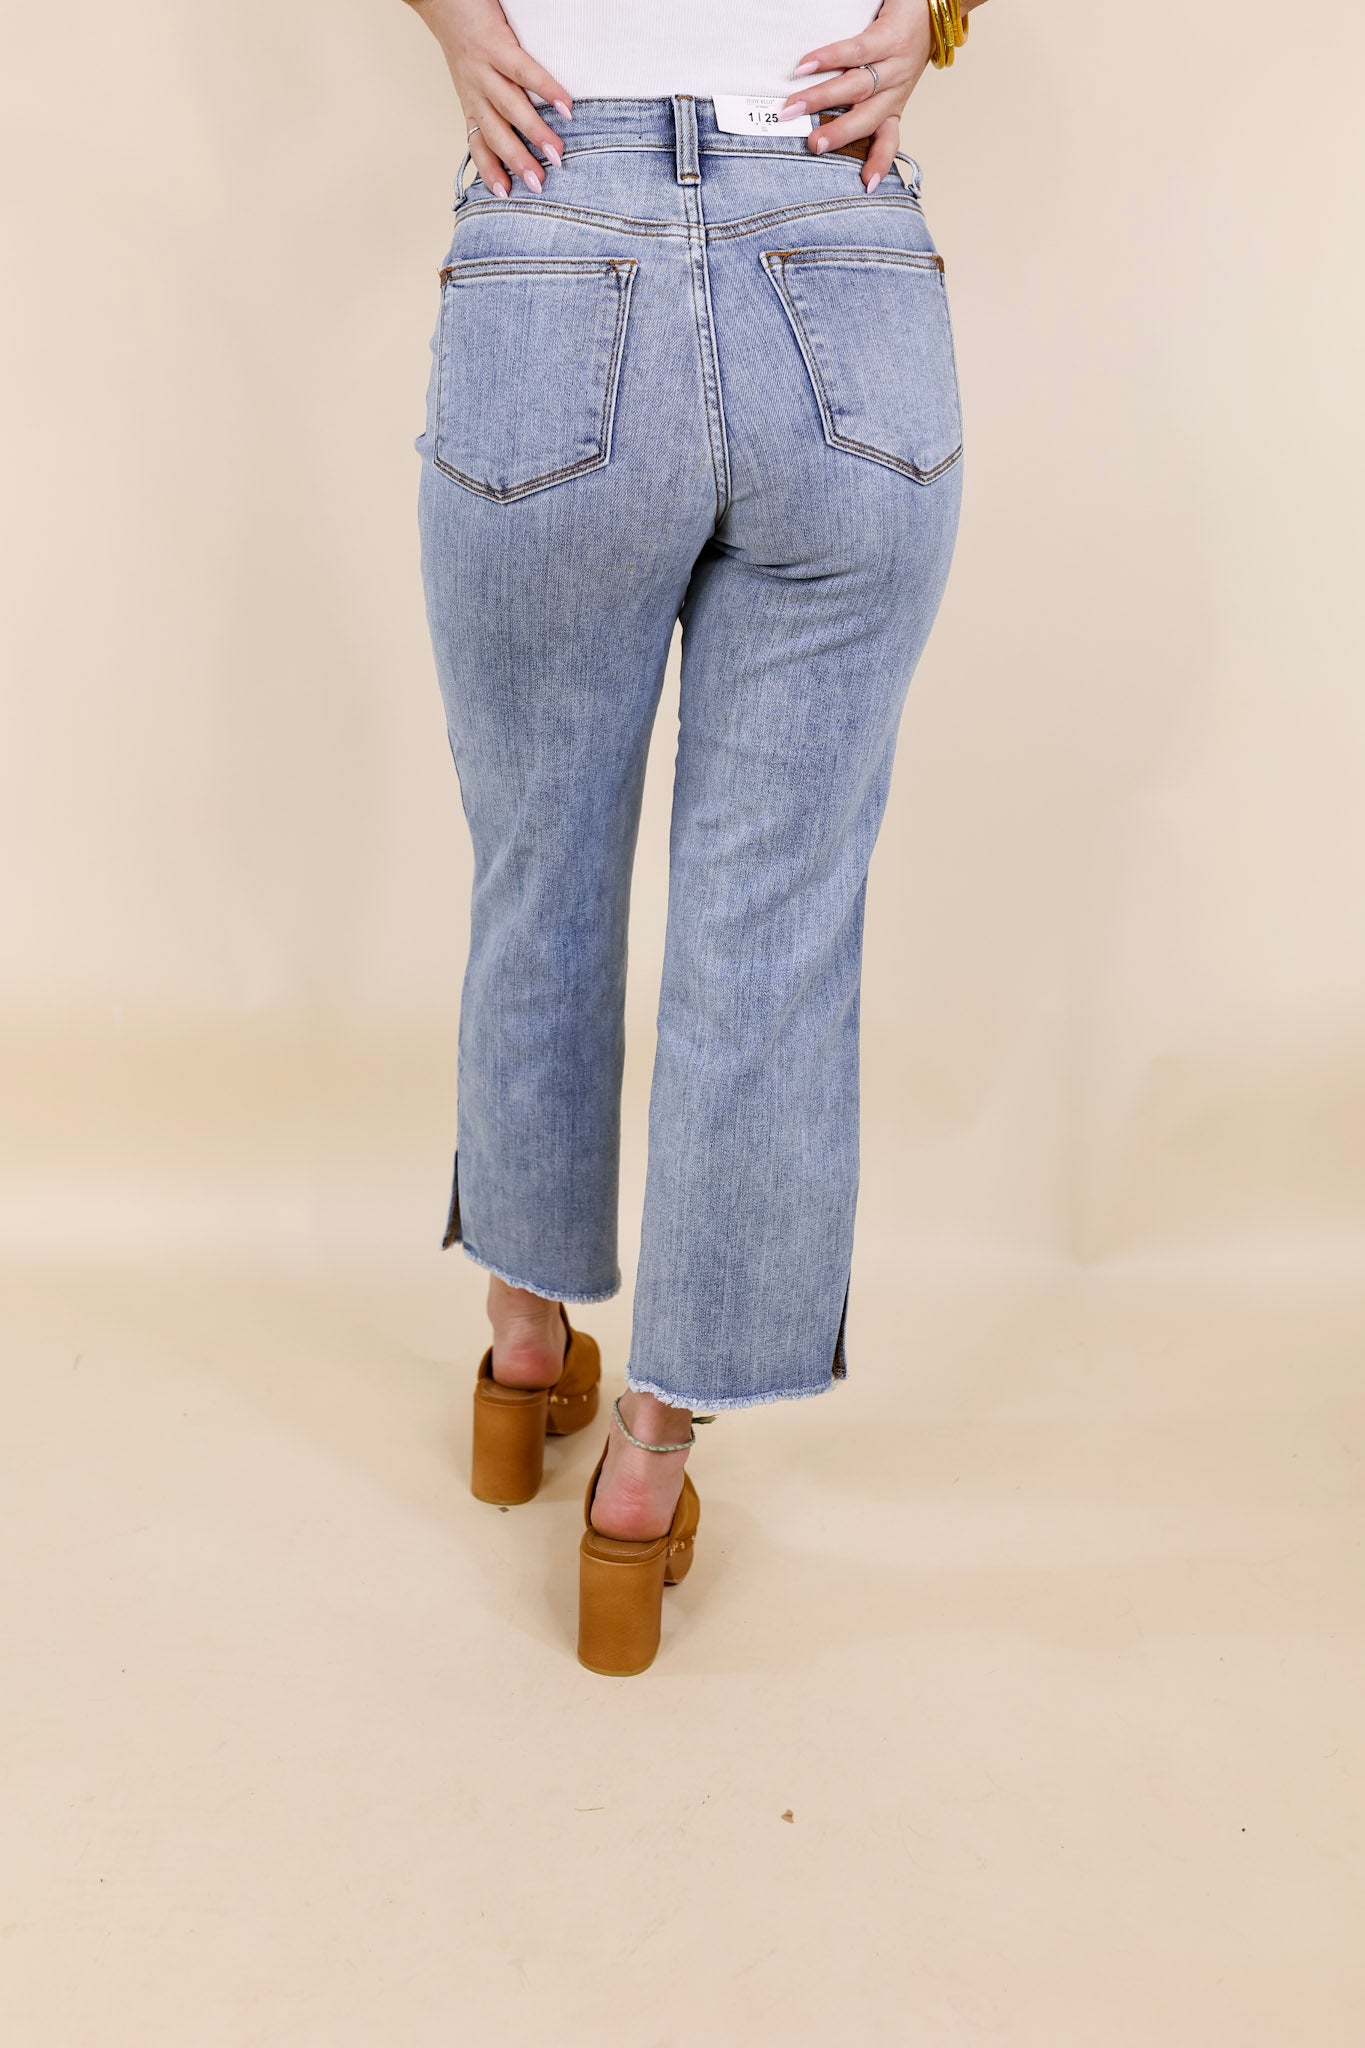 Judy Blue | Epic Count Down Side Slit Cropped Straight Leg Jeans in Light Wash - Giddy Up Glamour Boutique